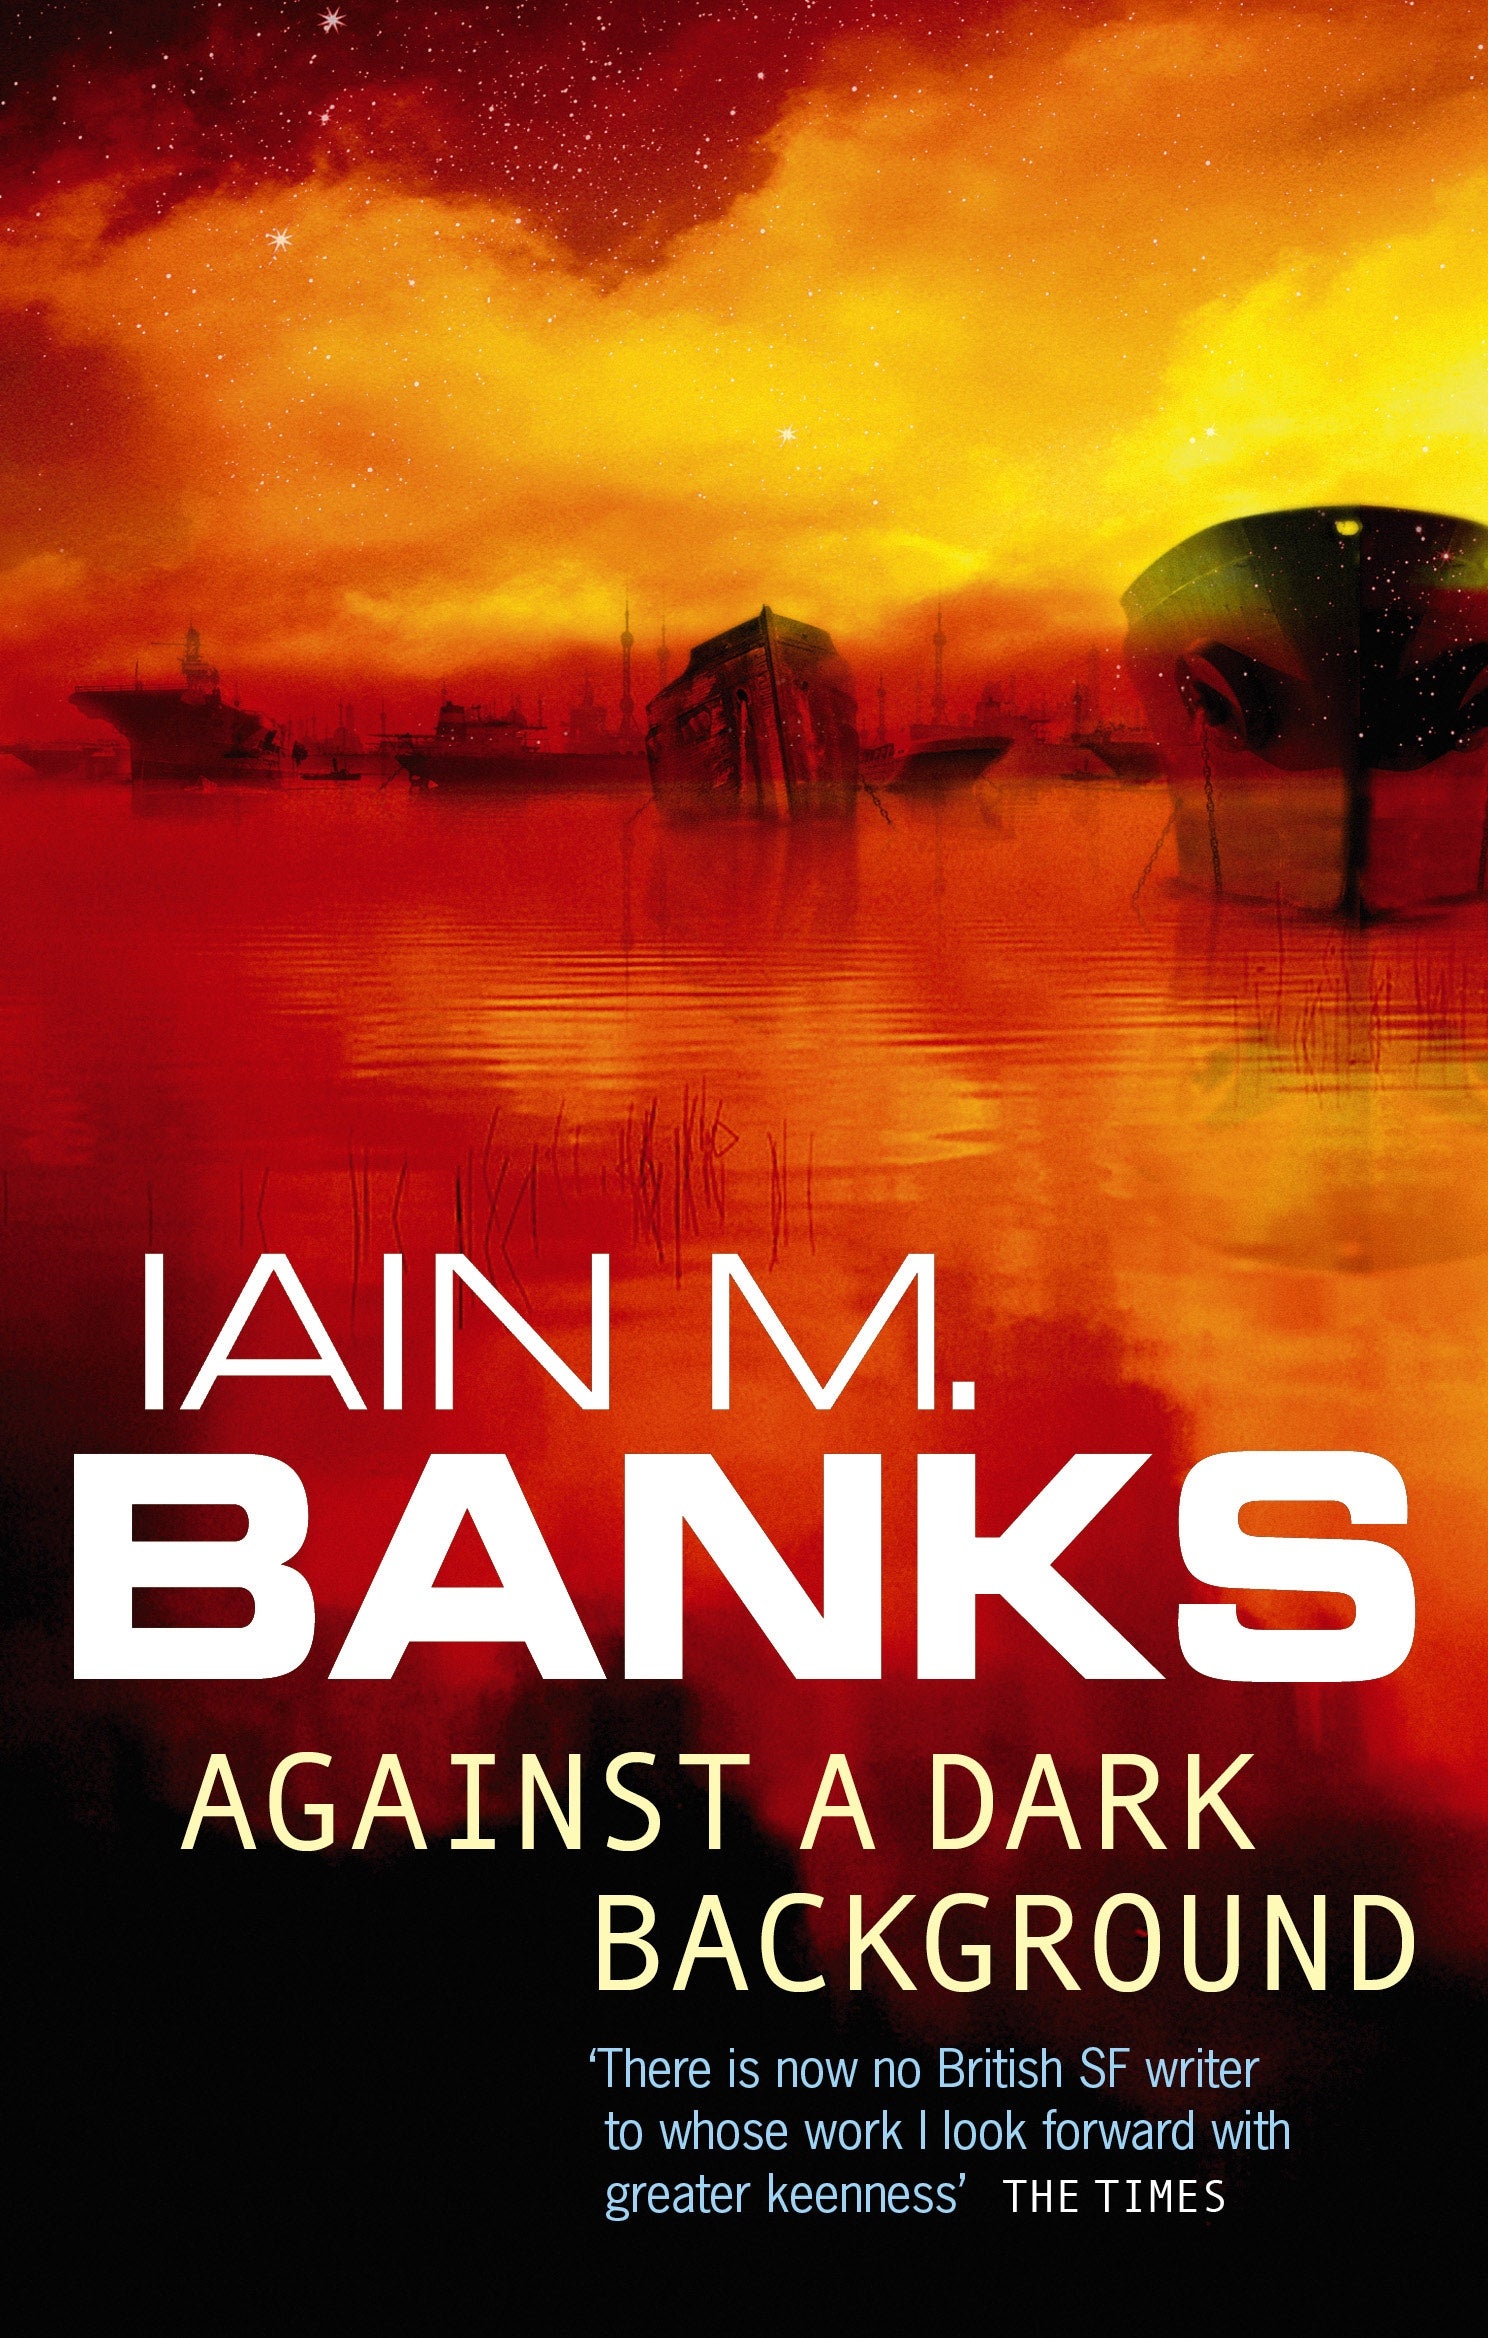 Against A Dark Background by Iain M. Banks